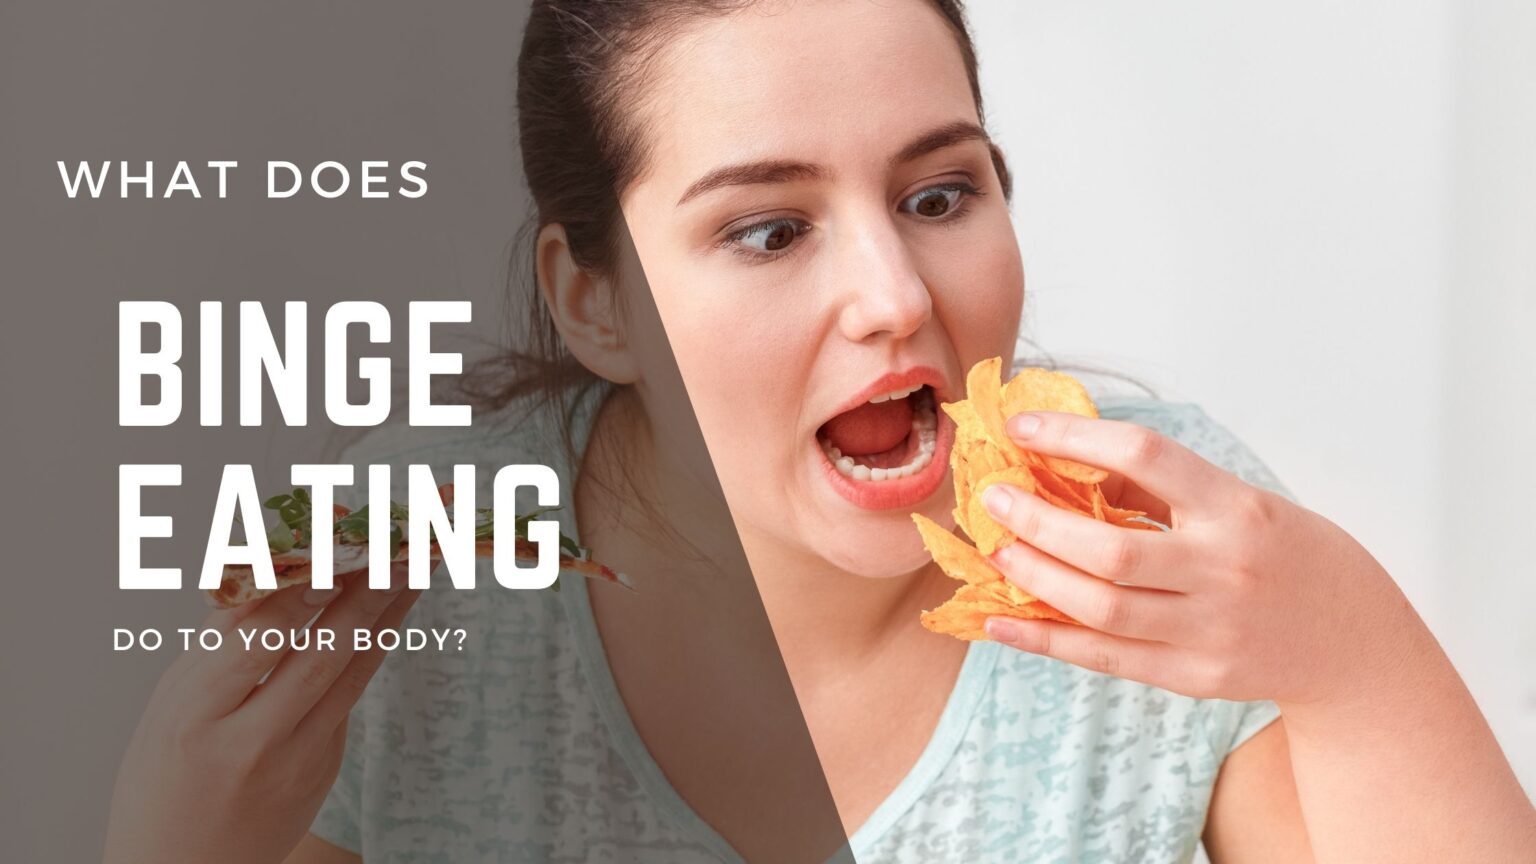 What Does Binge Eating Do To Your Body?